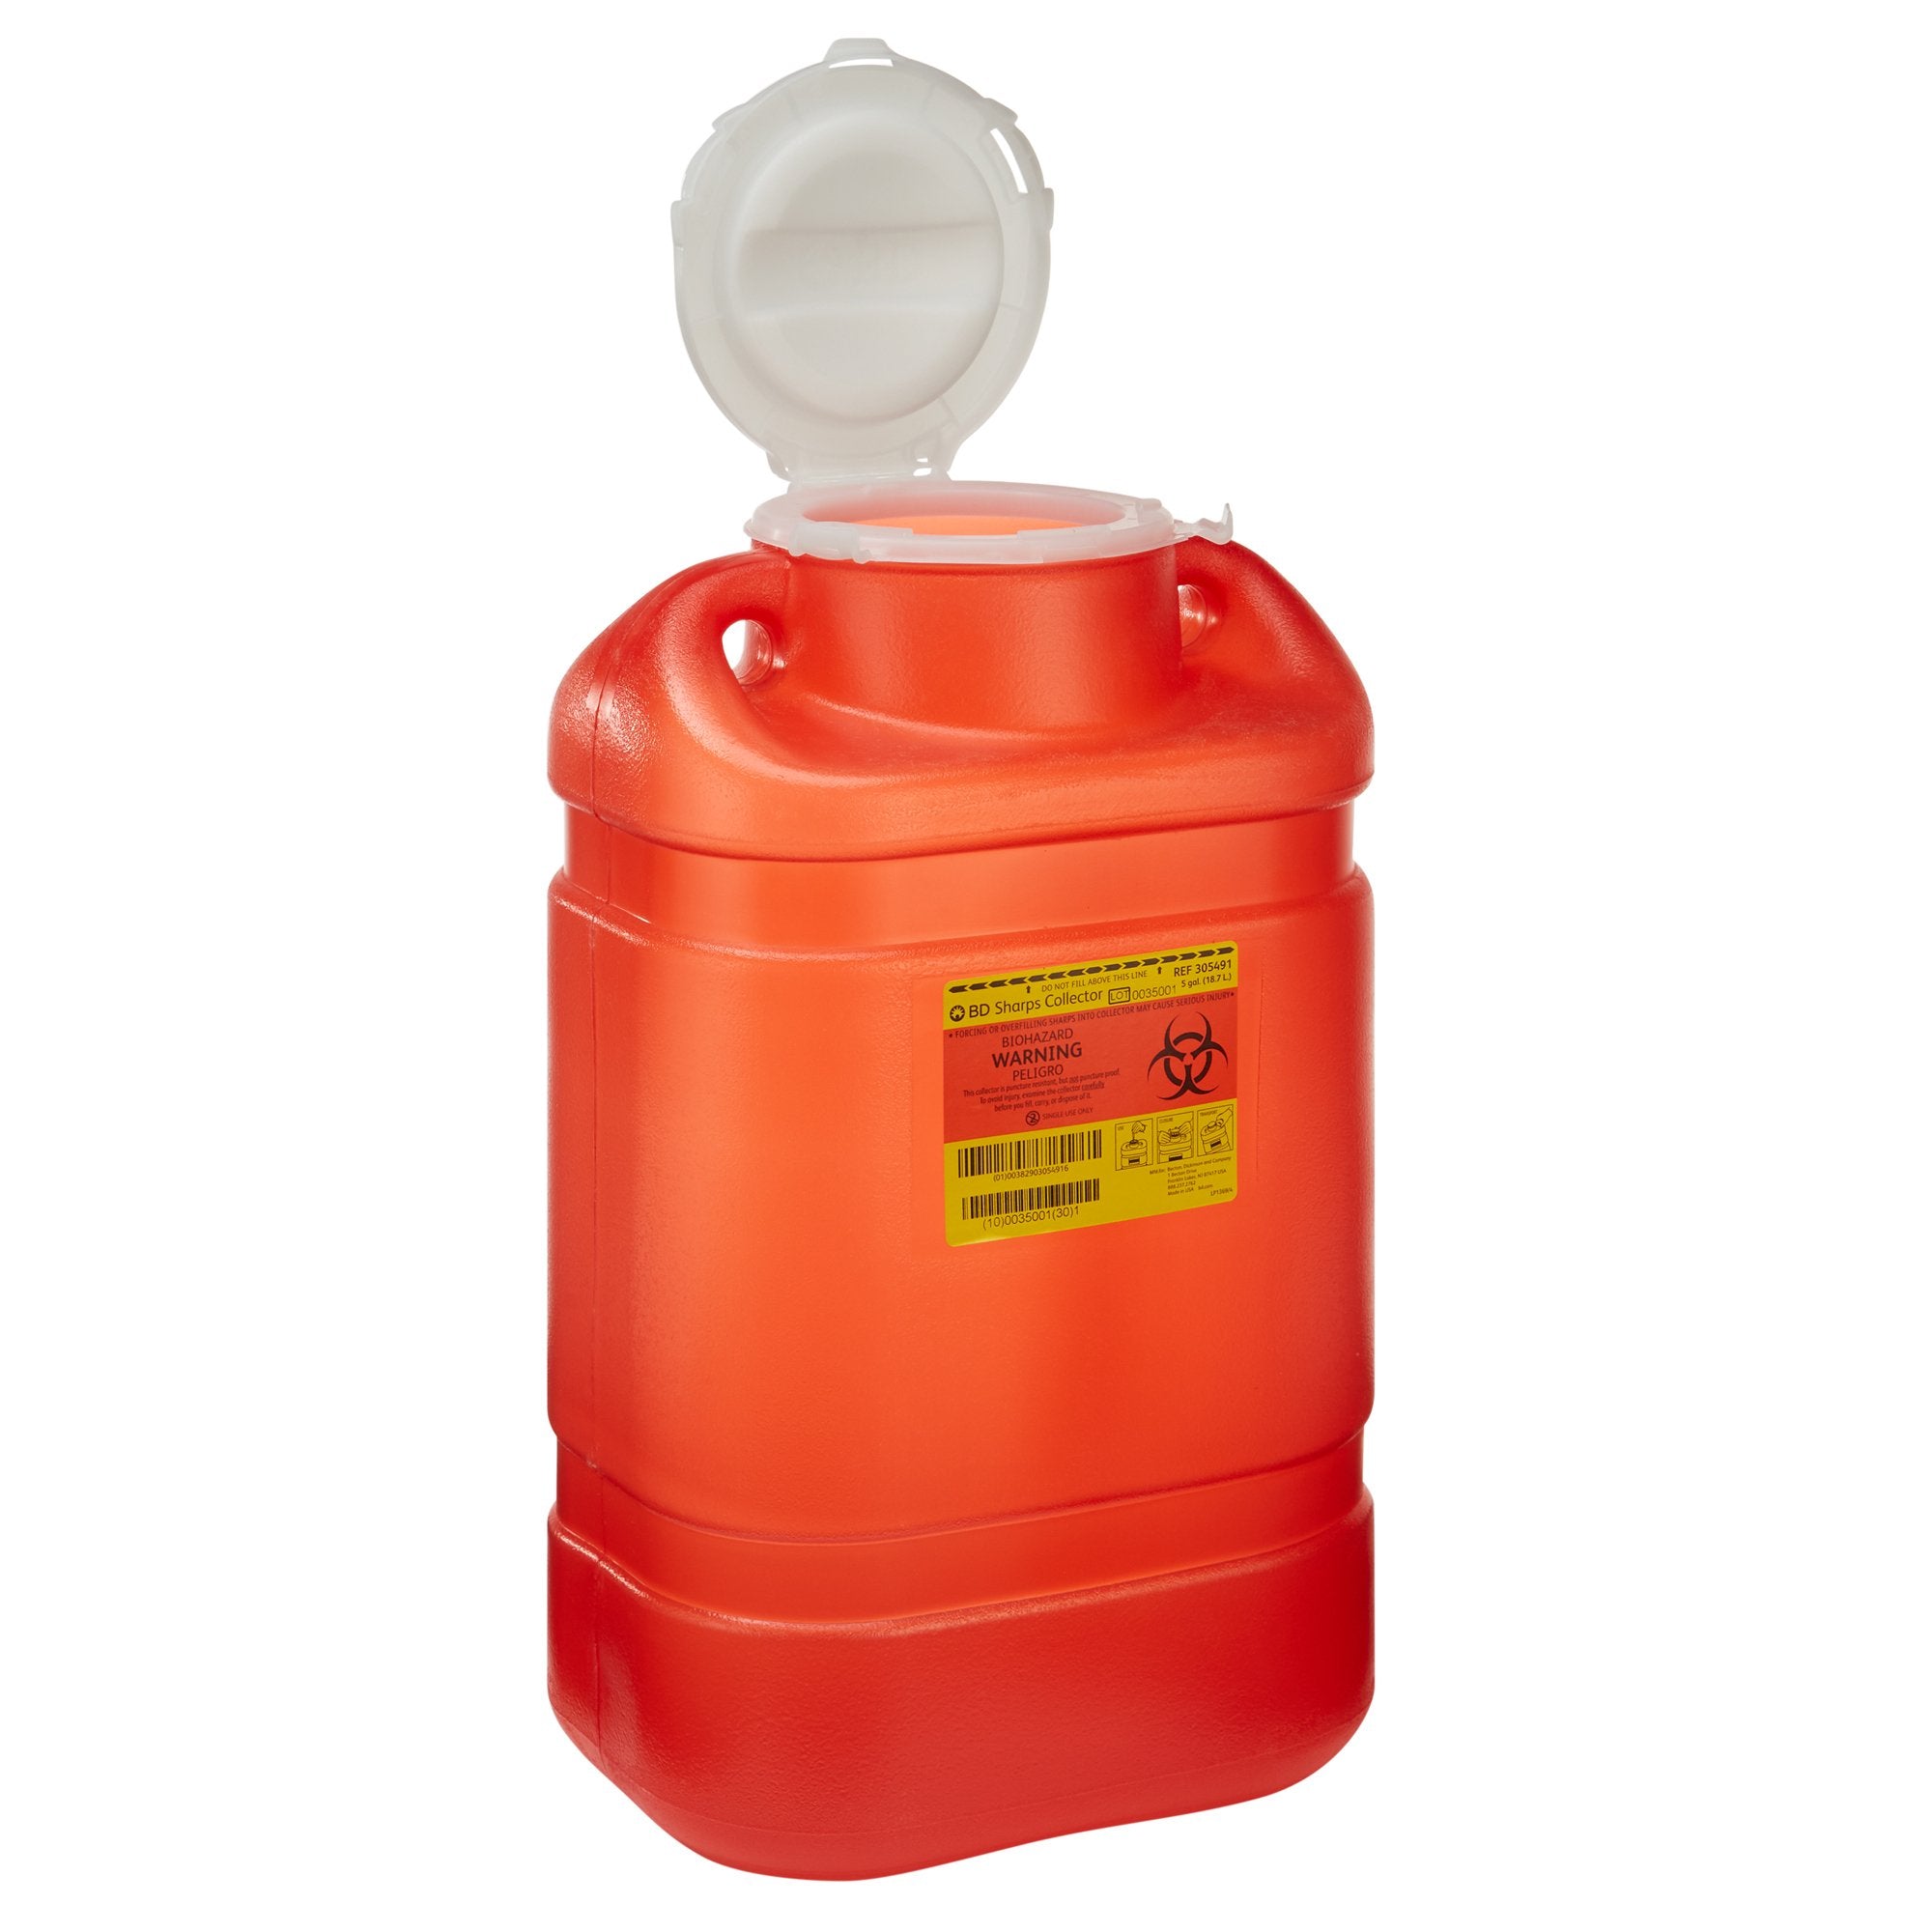 Sharps Container BD™ Red Base 18 H X 7-1/2 W X 10-1/2 D Inch Vertical Entry 5 Gallon